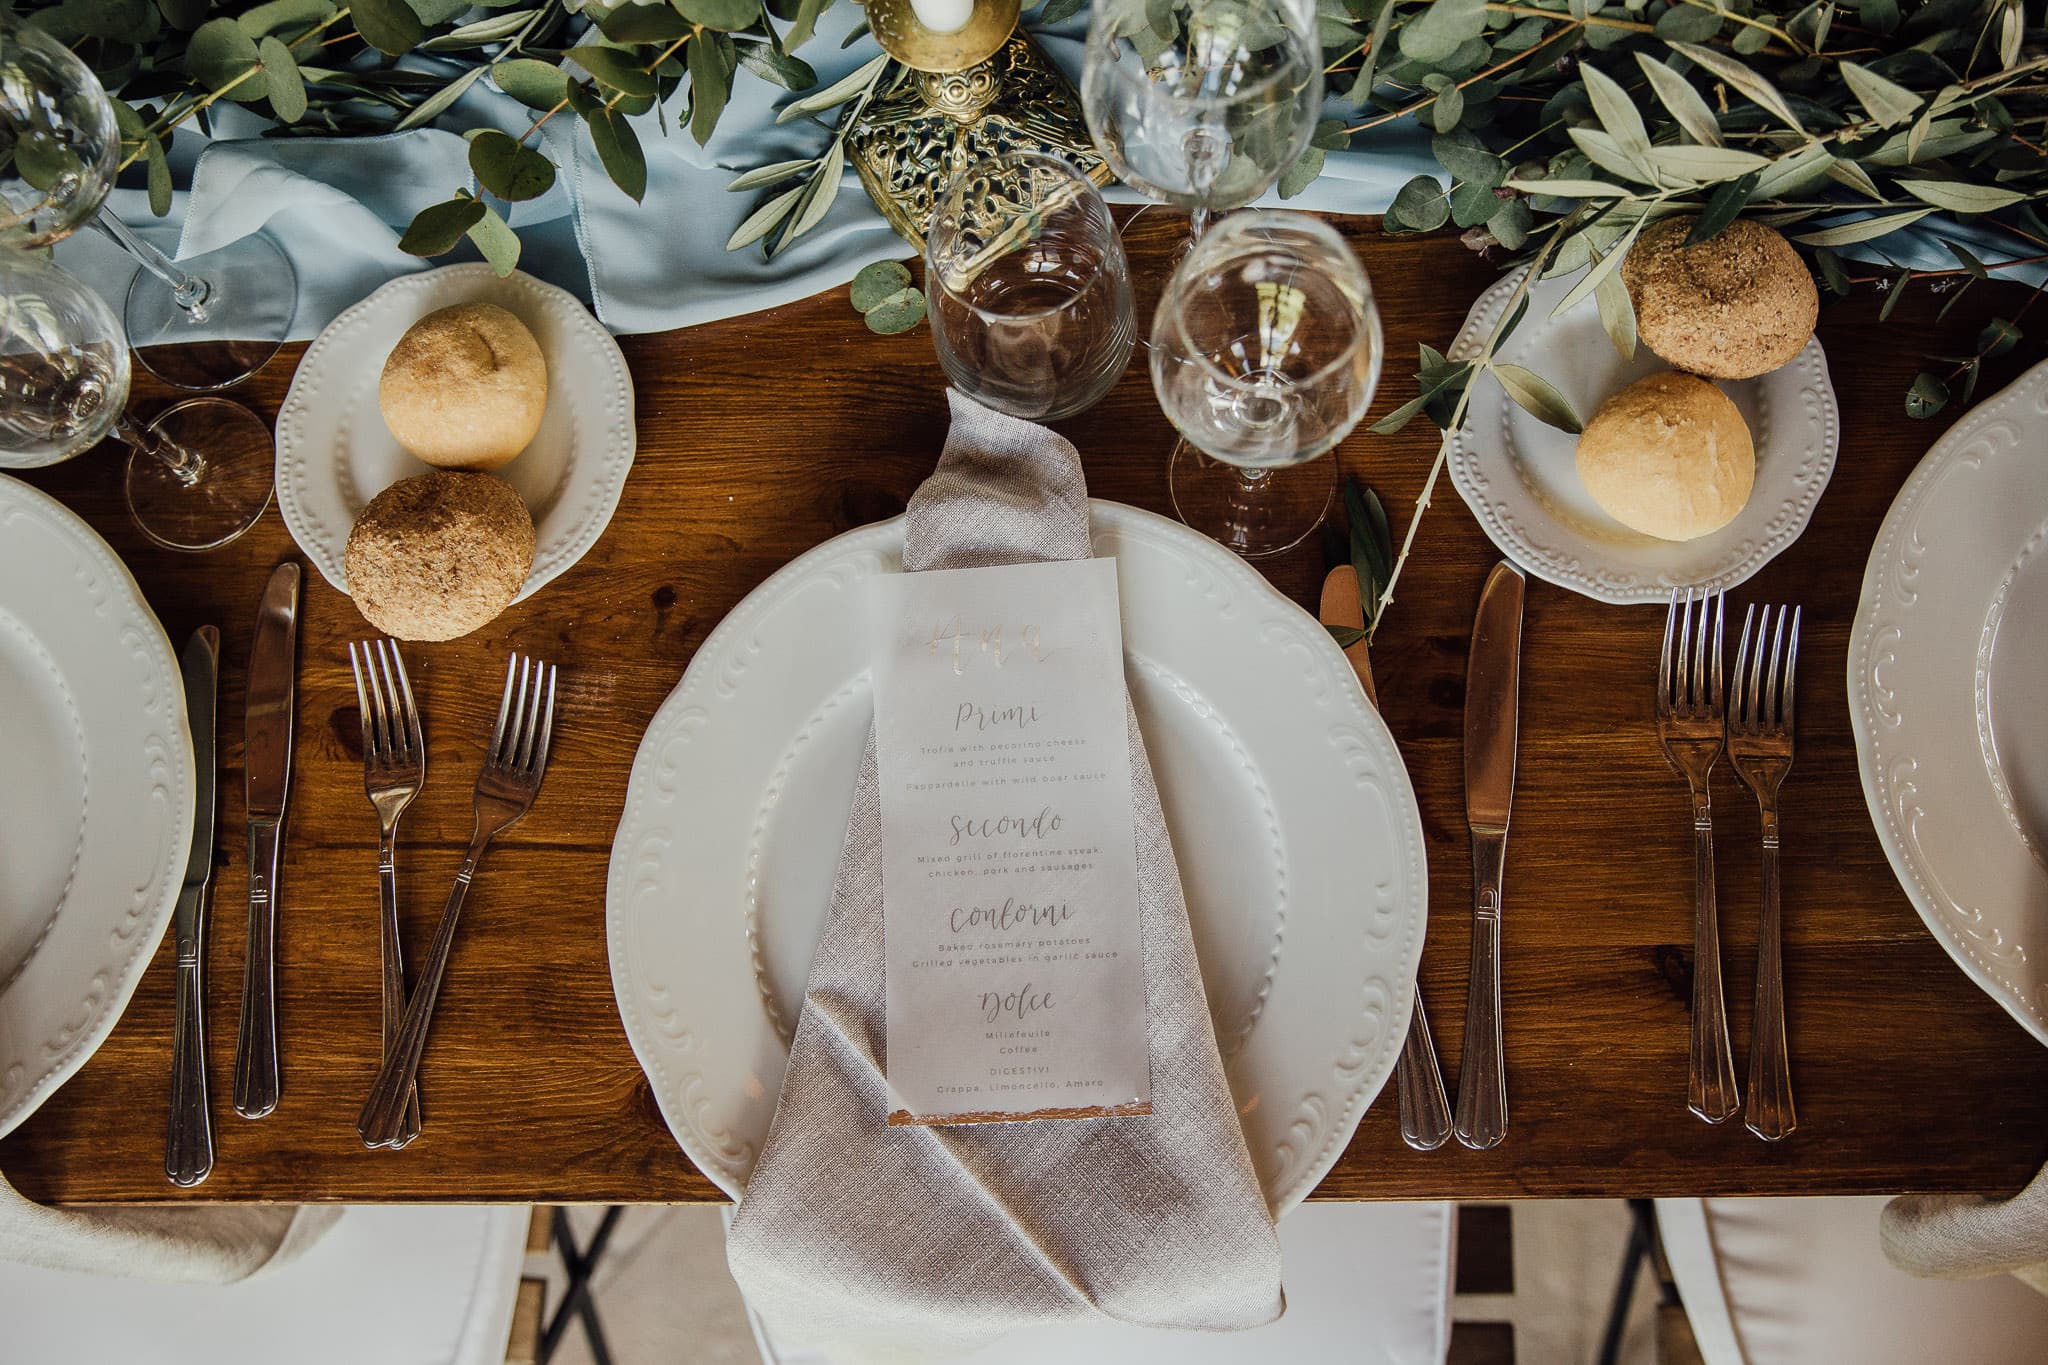 rustic table setting by Wiskow and White Italy wedding planners